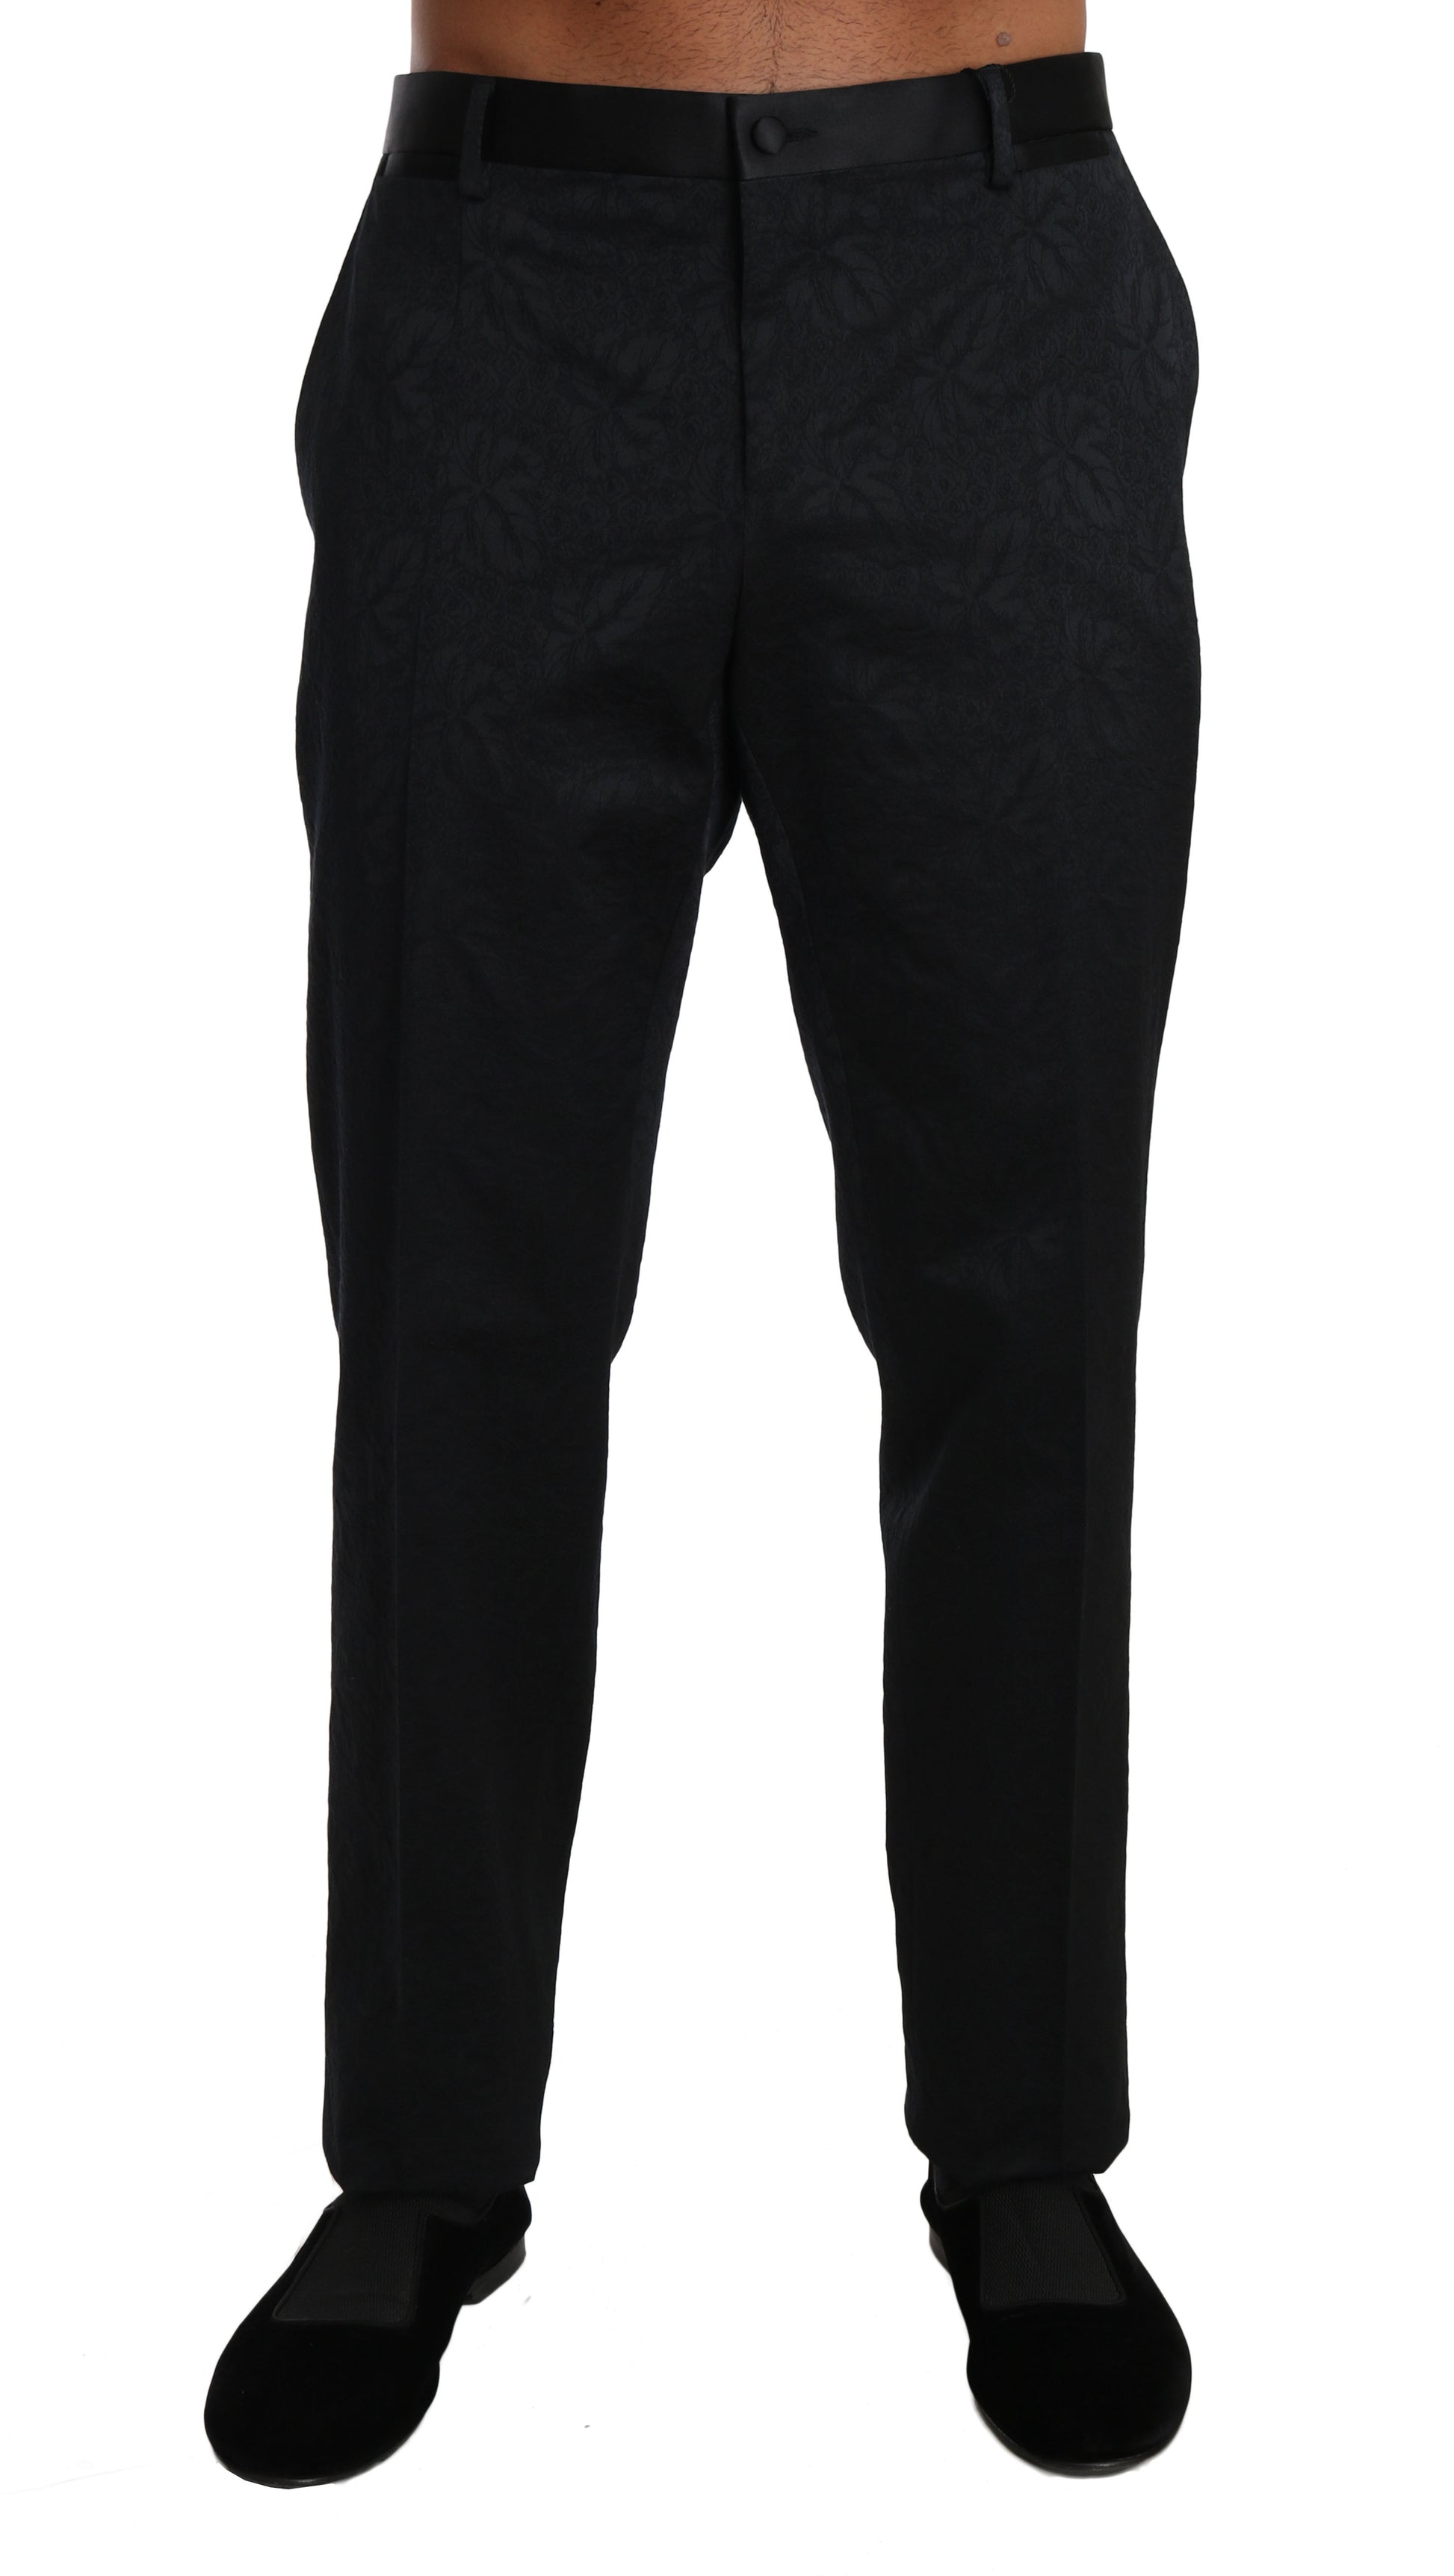 Black Cotton Brocade Formal Trousers Pants - Designed by Dolce & Gabbana Available to Buy at a Discounted Price on Moon Behind The Hill Online Designer Discount Store